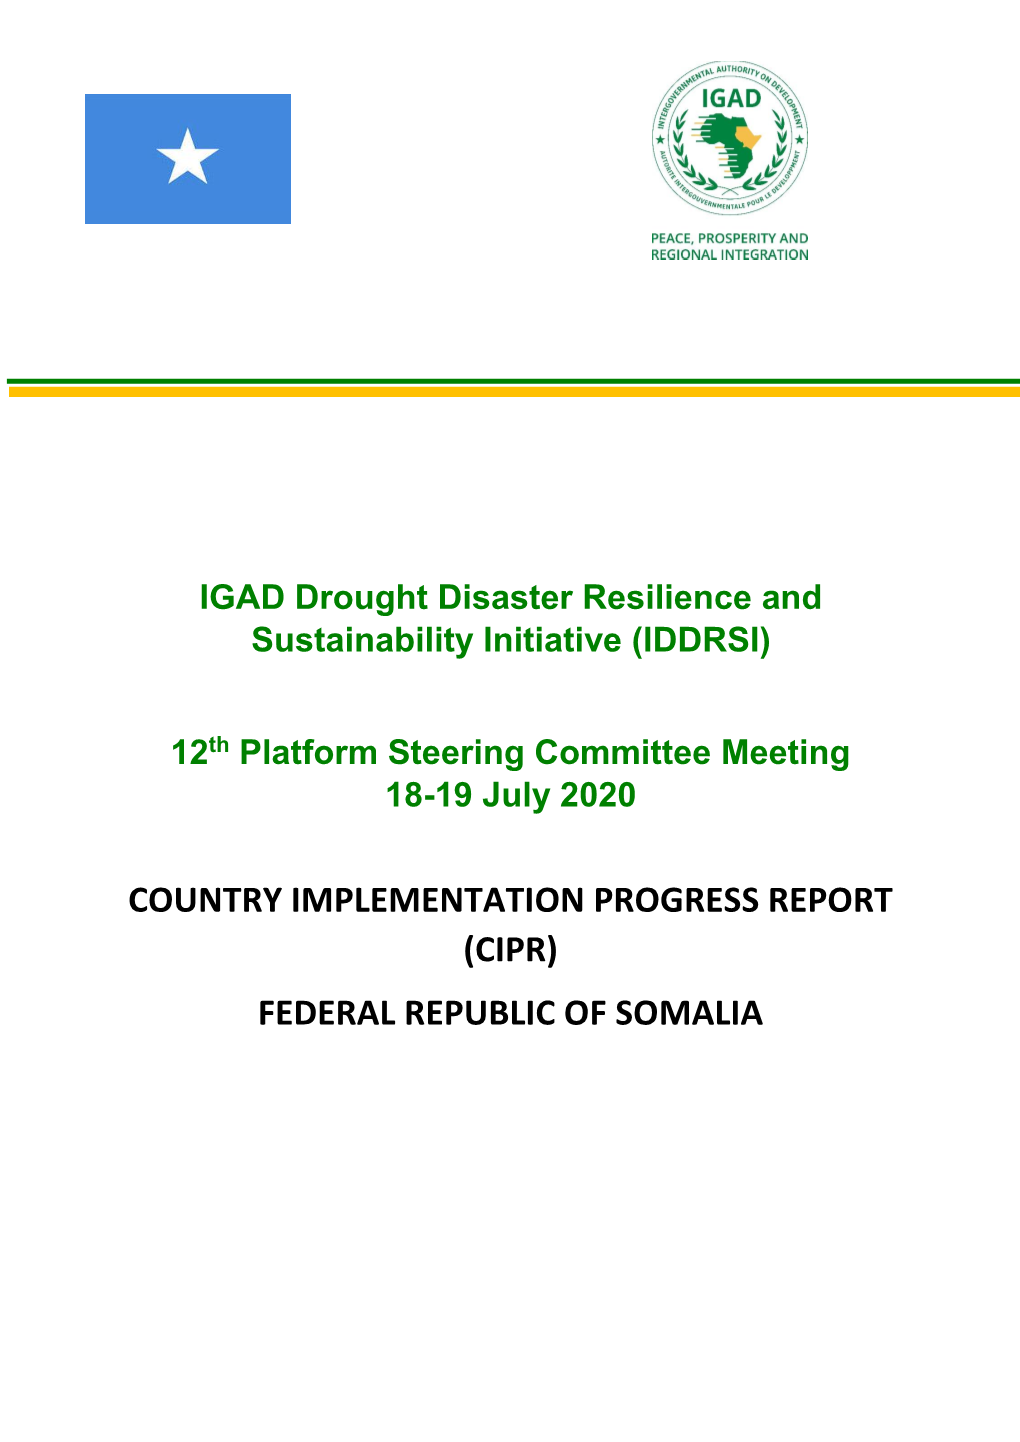 Country Implementation Progress Report (Cipr) Federal Republic of Somalia I